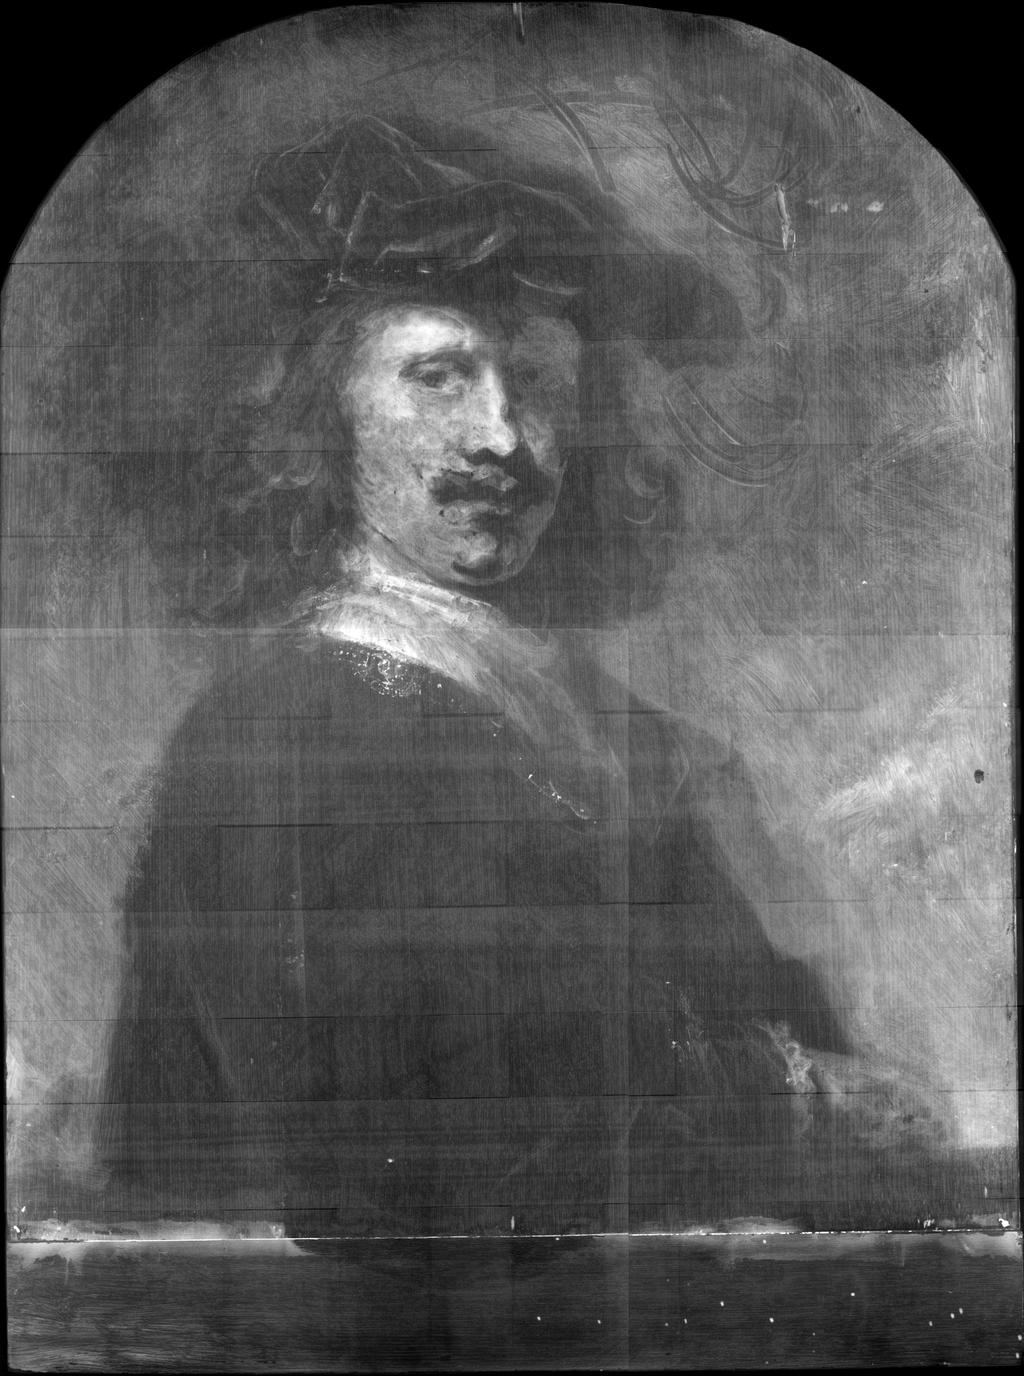 [7] Unlike Rembrandt, however, he did not depict himself wearing a cross hanging from the gold chain around his neck.